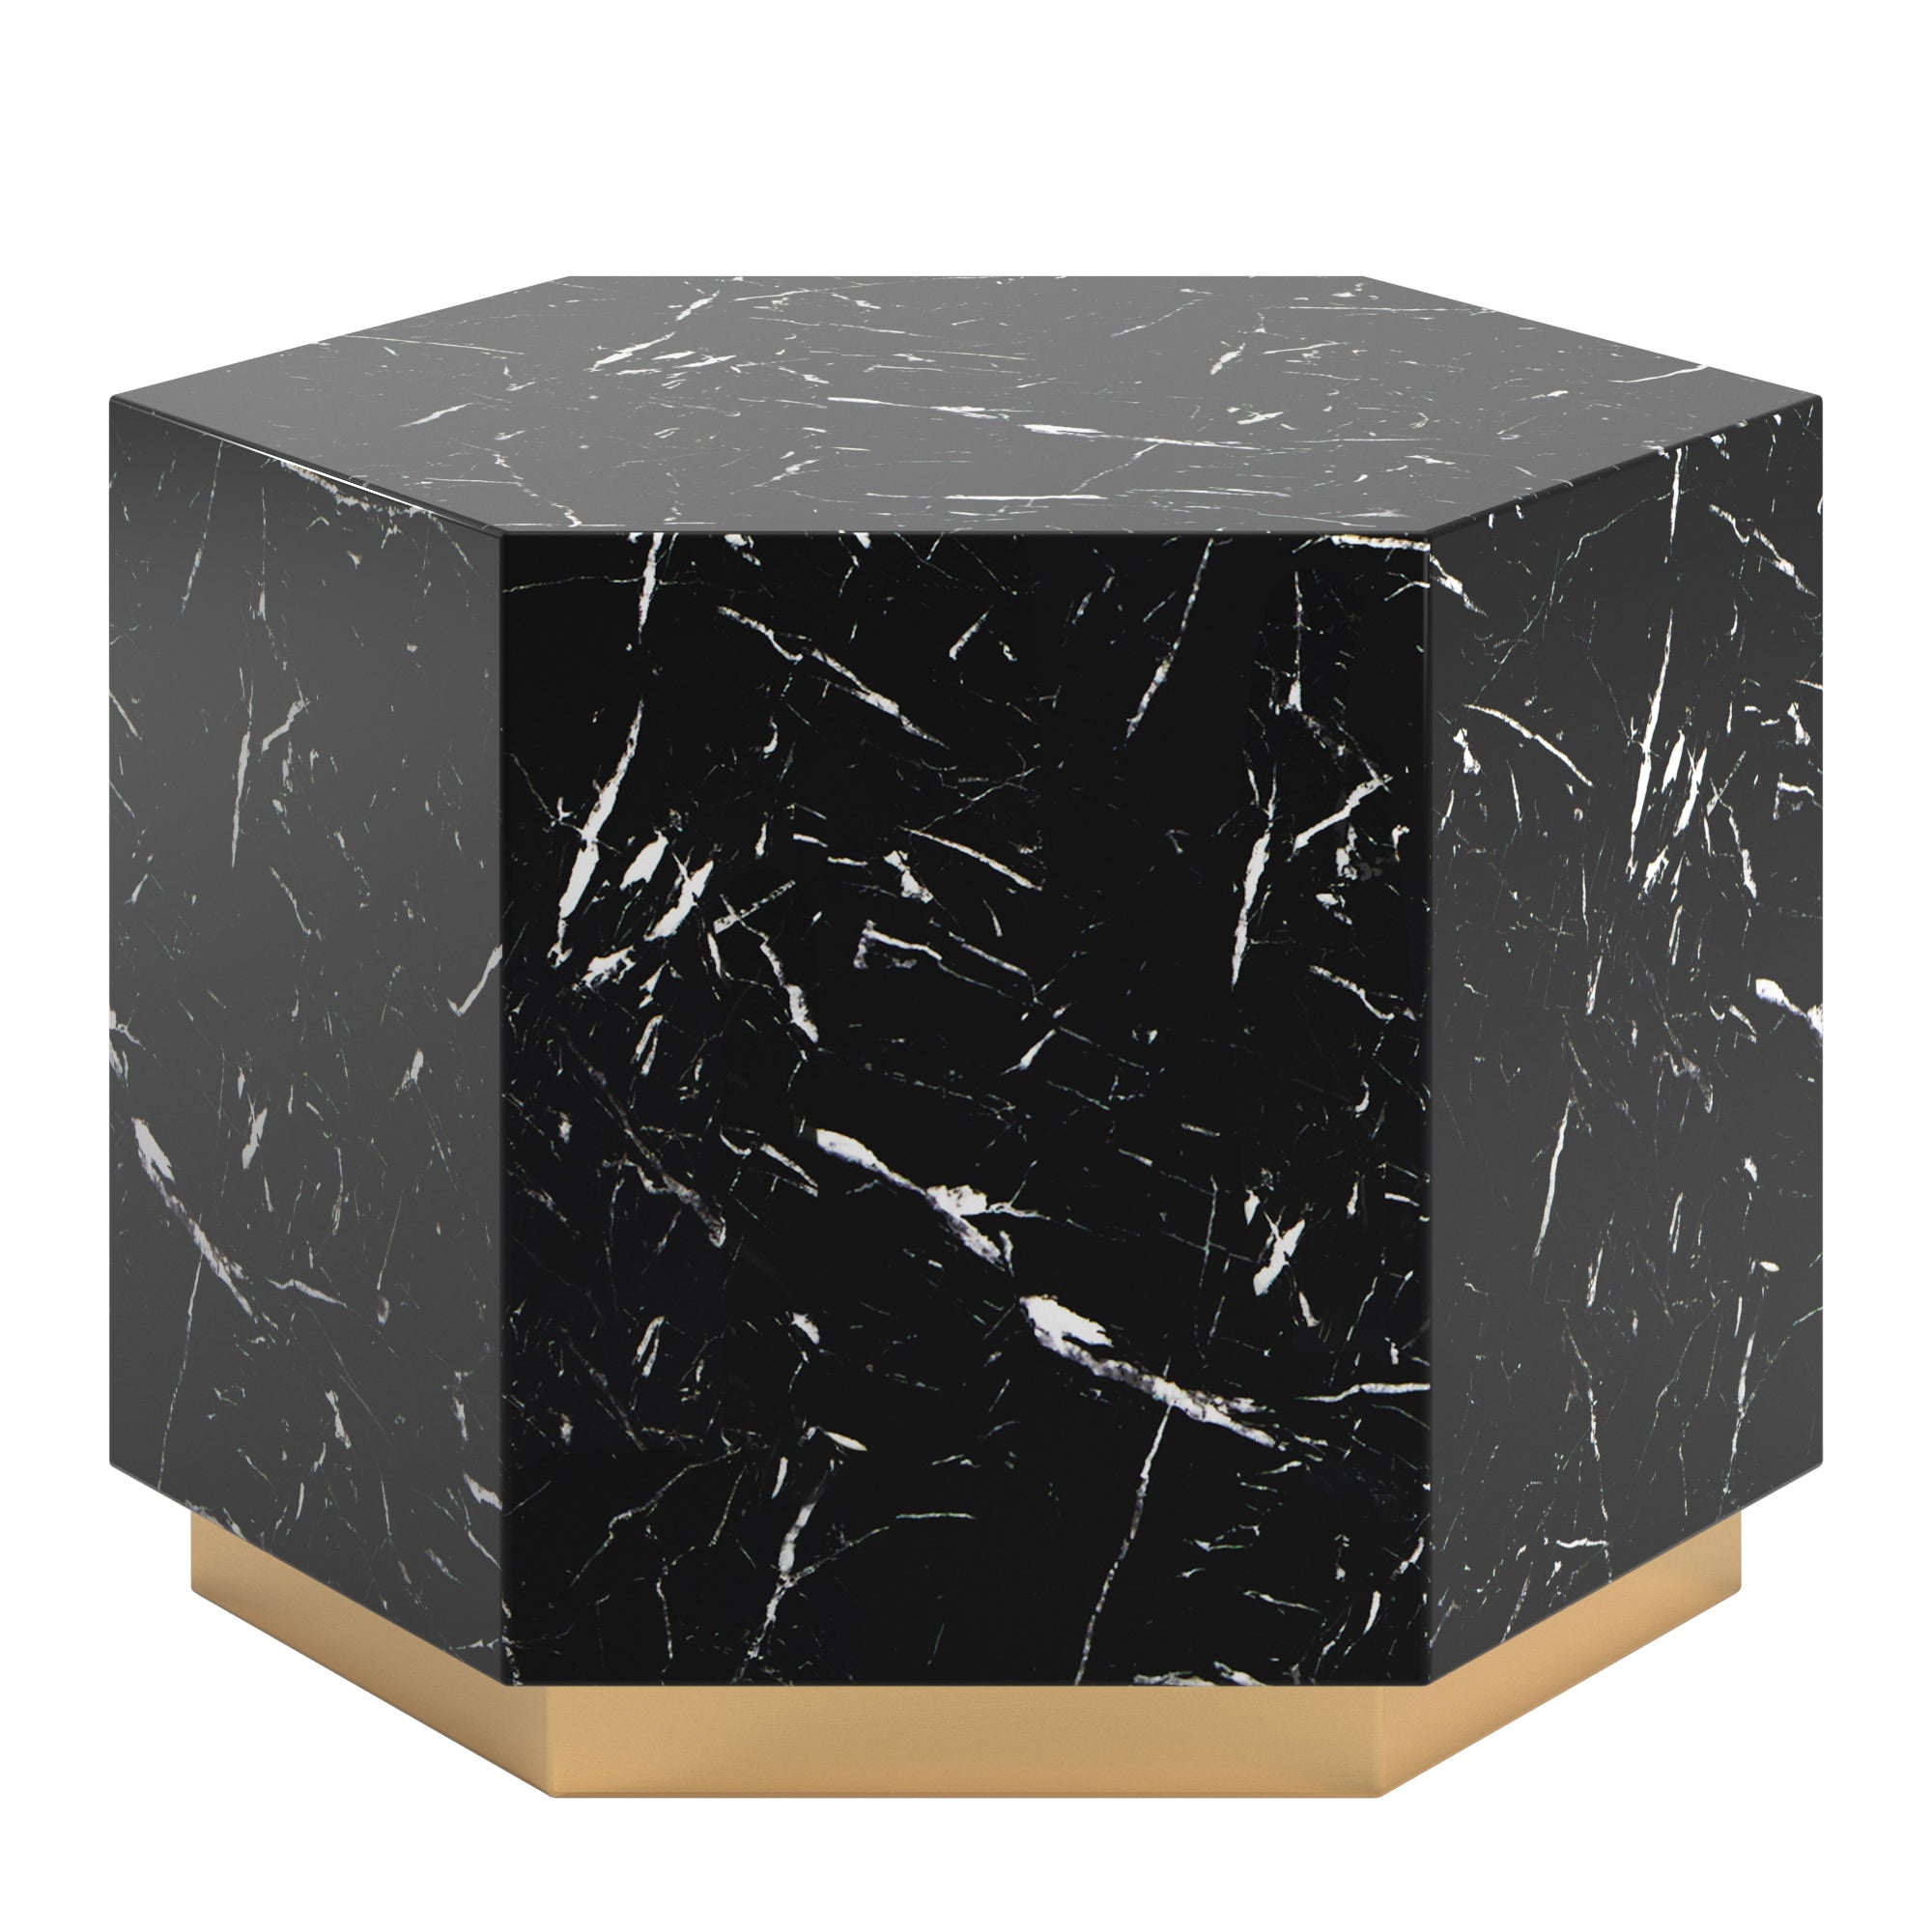 Faux Marble Coffee Table - Black, Hexagon (Set of 3)